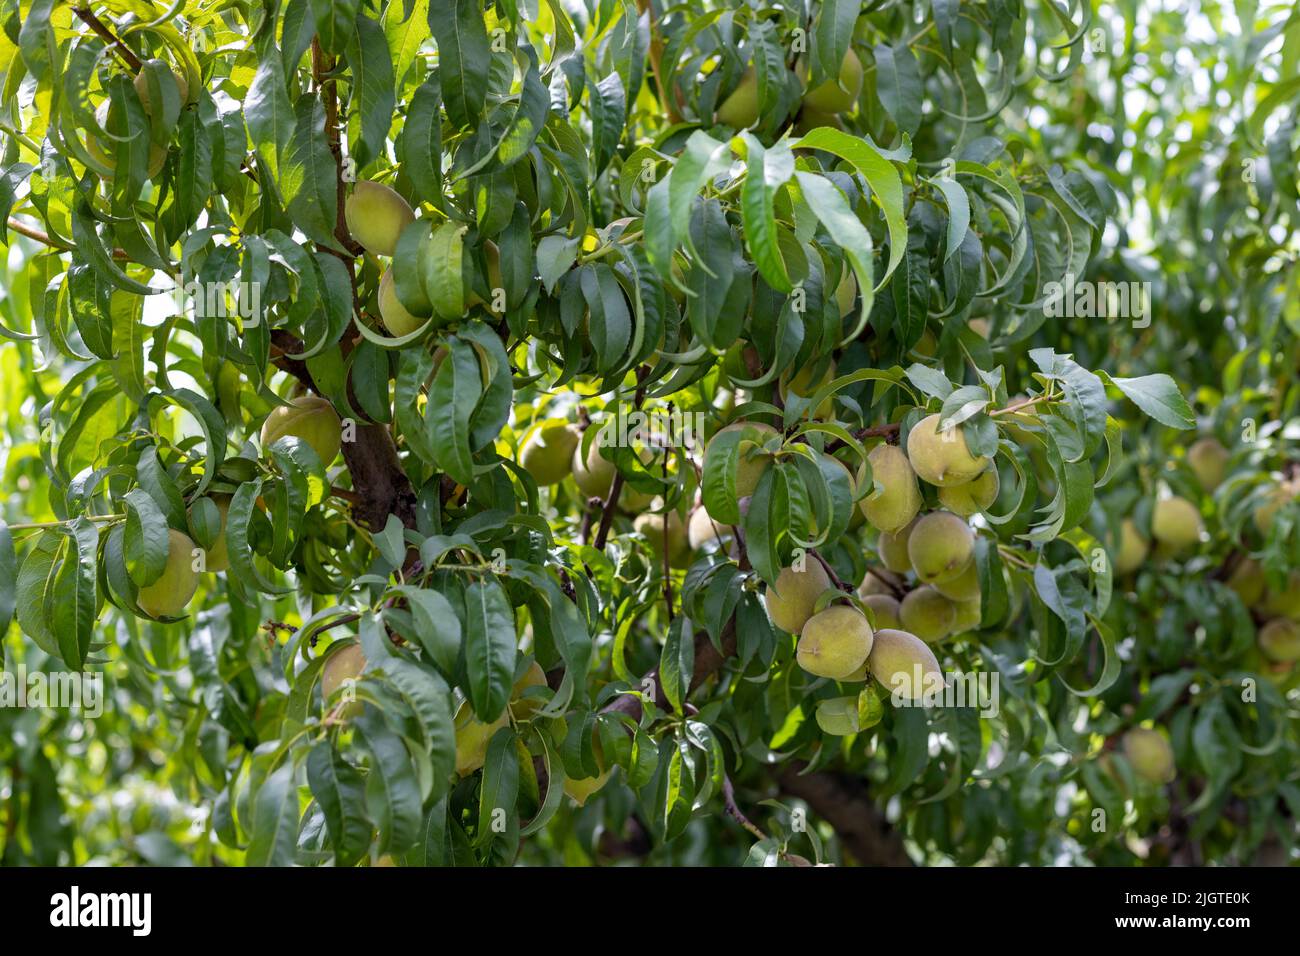 Peaches fruit in the early stages in a tree Stock Photo